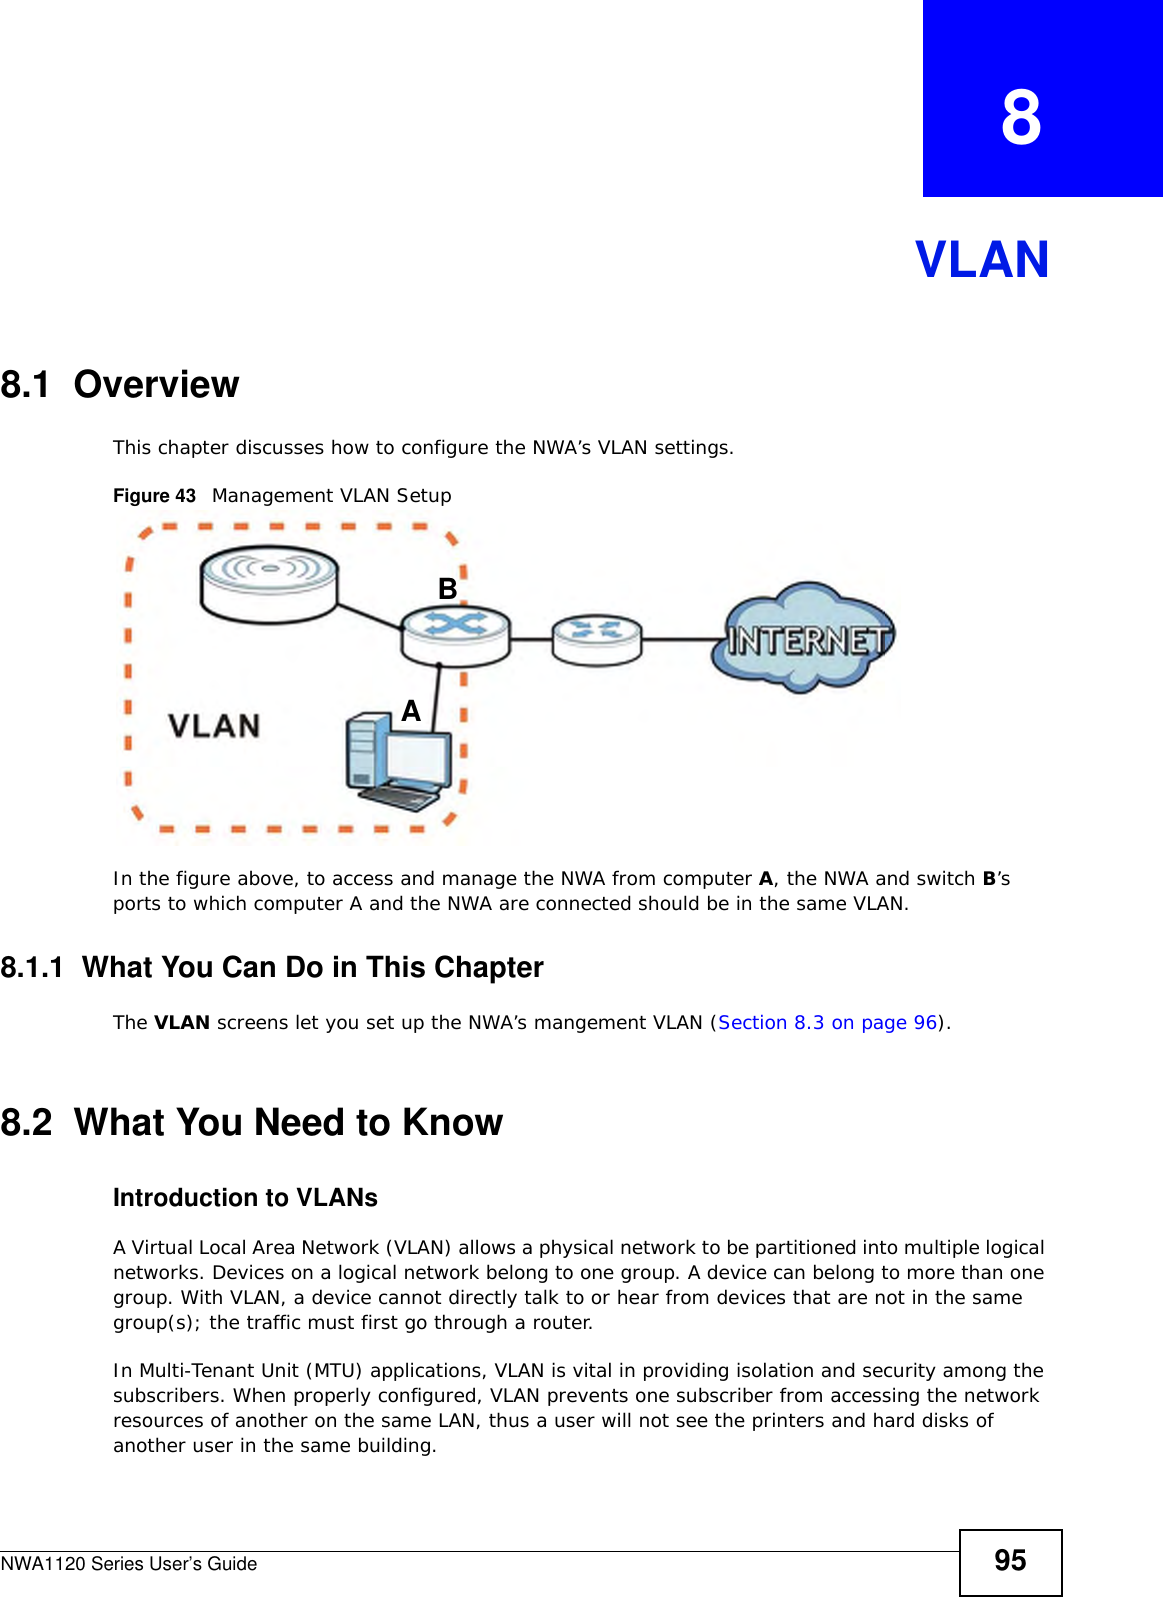 NWA1120 Series User’s Guide 95CHAPTER   8VLAN8.1  OverviewThis chapter discusses how to configure the NWA’s VLAN settings.Figure 43   Management VLAN SetupIn the figure above, to access and manage the NWA from computer A, the NWA and switch B’s ports to which computer A and the NWA are connected should be in the same VLAN.8.1.1  What You Can Do in This ChapterThe VLAN screens let you set up the NWA’s mangement VLAN (Section 8.3 on page 96).8.2  What You Need to KnowIntroduction to VLANs A Virtual Local Area Network (VLAN) allows a physical network to be partitioned into multiple logical networks. Devices on a logical network belong to one group. A device can belong to more than one group. With VLAN, a device cannot directly talk to or hear from devices that are not in the same group(s); the traffic must first go through a router.In Multi-Tenant Unit (MTU) applications, VLAN is vital in providing isolation and security among the subscribers. When properly configured, VLAN prevents one subscriber from accessing the network resources of another on the same LAN, thus a user will not see the printers and hard disks of another user in the same building. AB